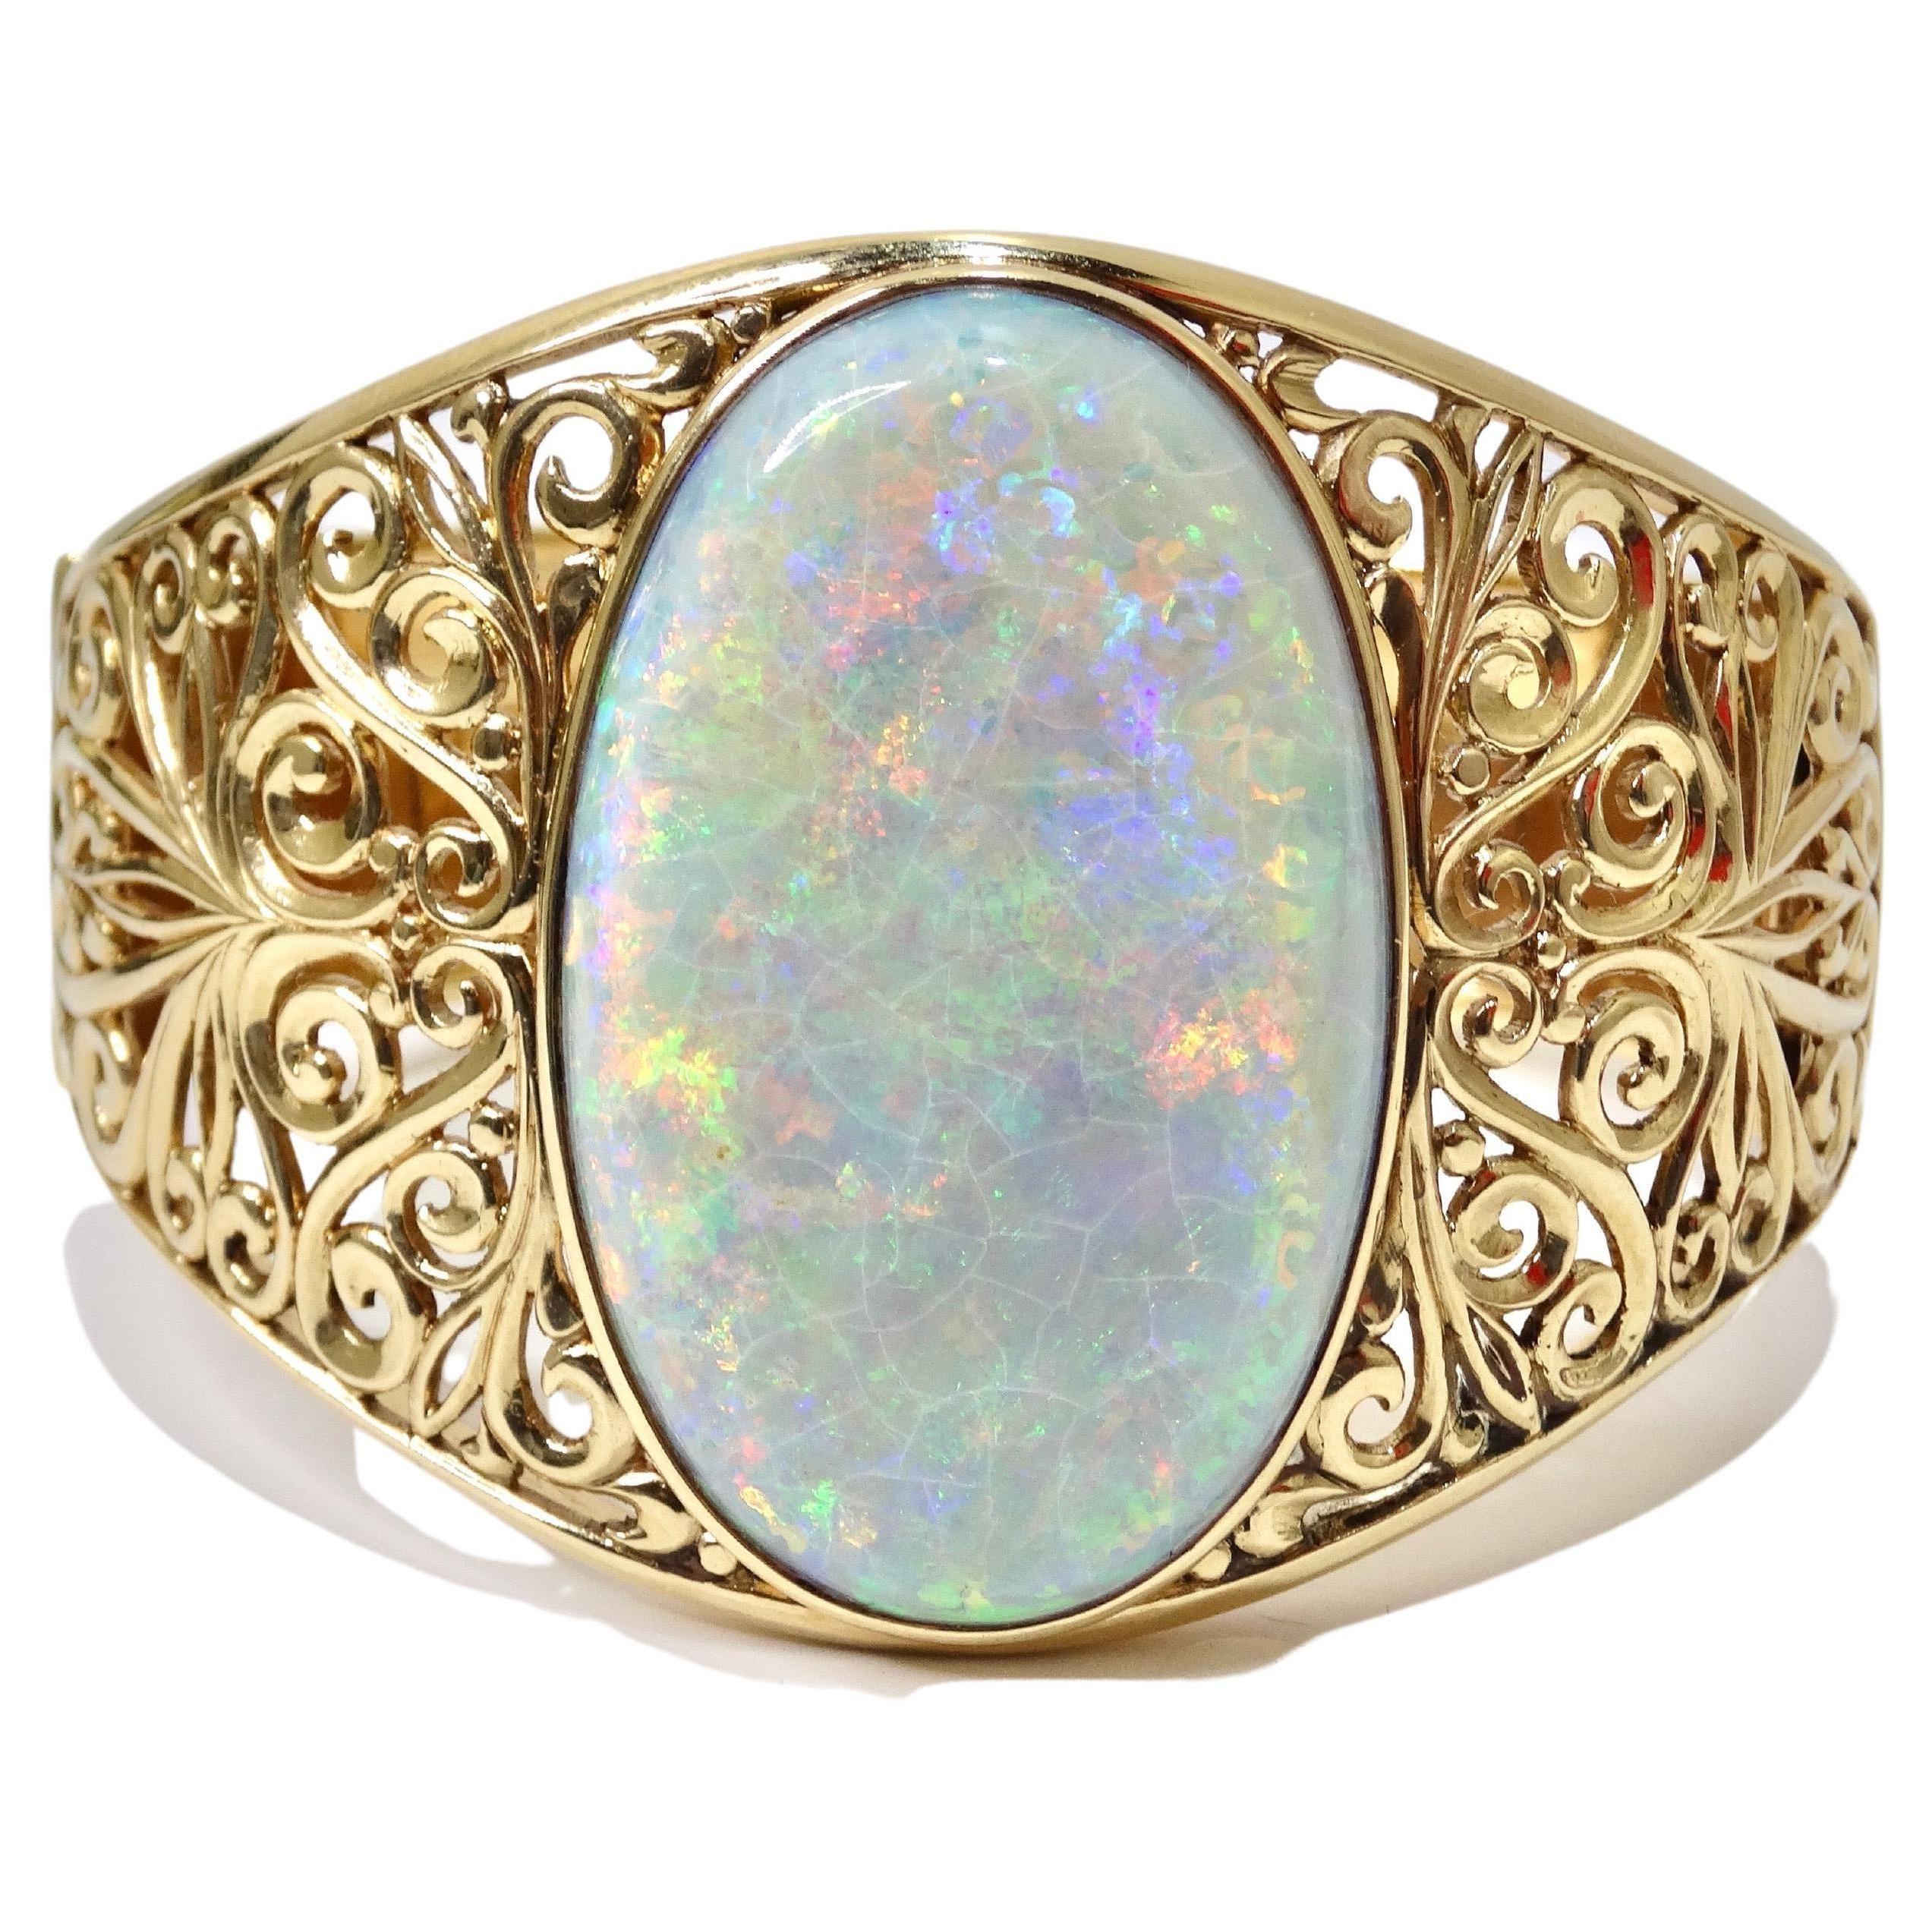 ***Appraise in writing from the International Gemological Appraisal Services

One ladies custom, handmade,  14k yellow gold, excellent quality, large, natural Australian opal cabochon bracelet. Featured in the bracelet is an oval, cabochon natural